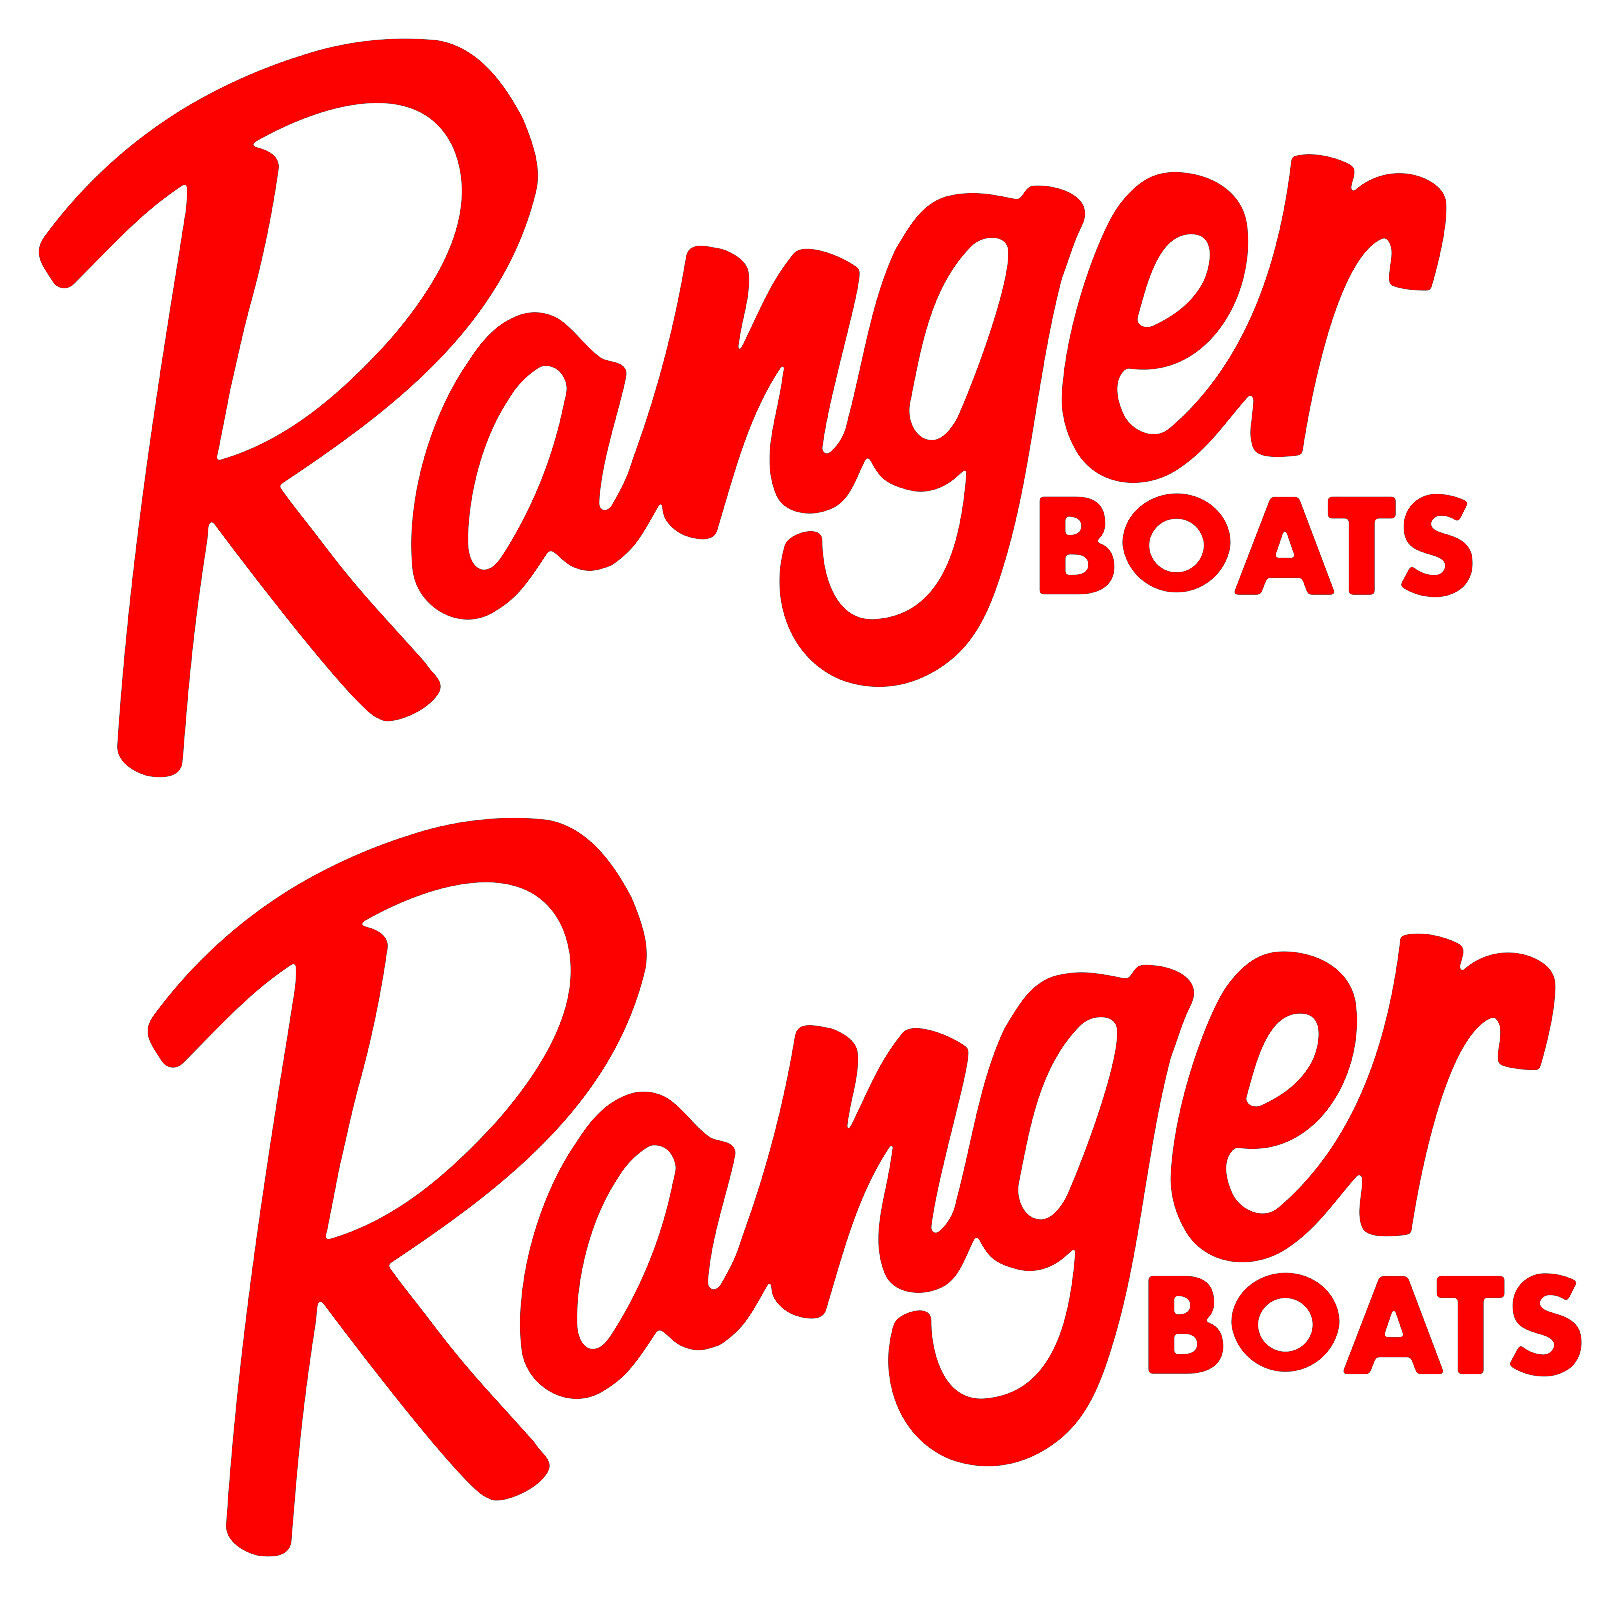 Set of 2 Vinyl Stickers Decals for Ranger Boat Hull, truck . Mail w/Tracking #